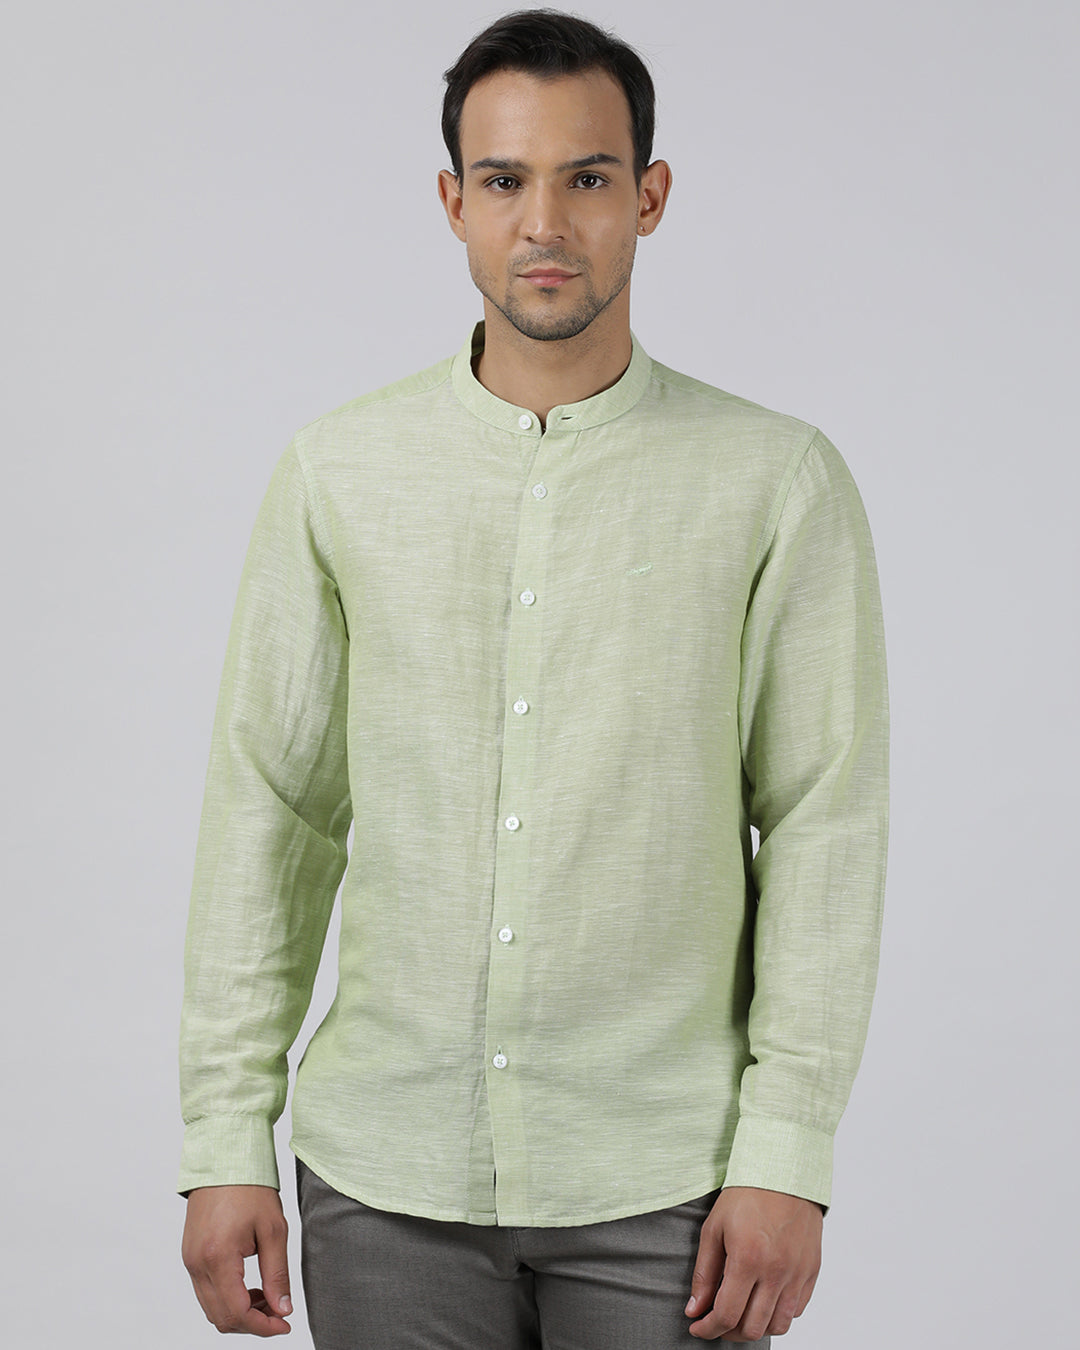 Casual Light Green Full Sleeve Regular Fit Solid Shirt with Collar for Men